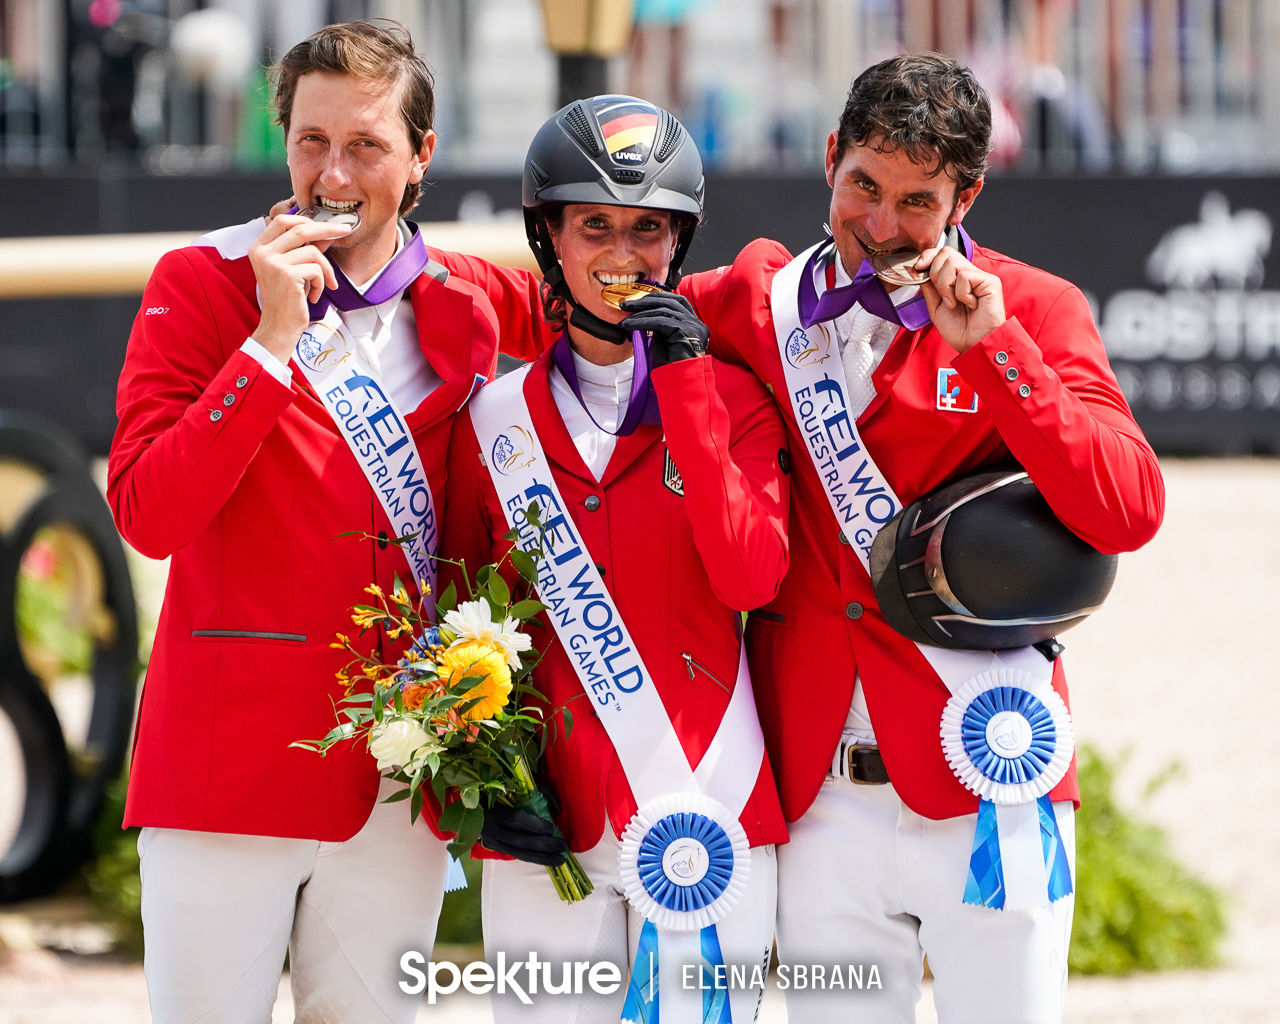 Earchphoto - Simone Blum, Martin Fuchs, and Steve Guerdat on the individual show jumping podium at the 2018 World Equestrian Games in Tryon NC